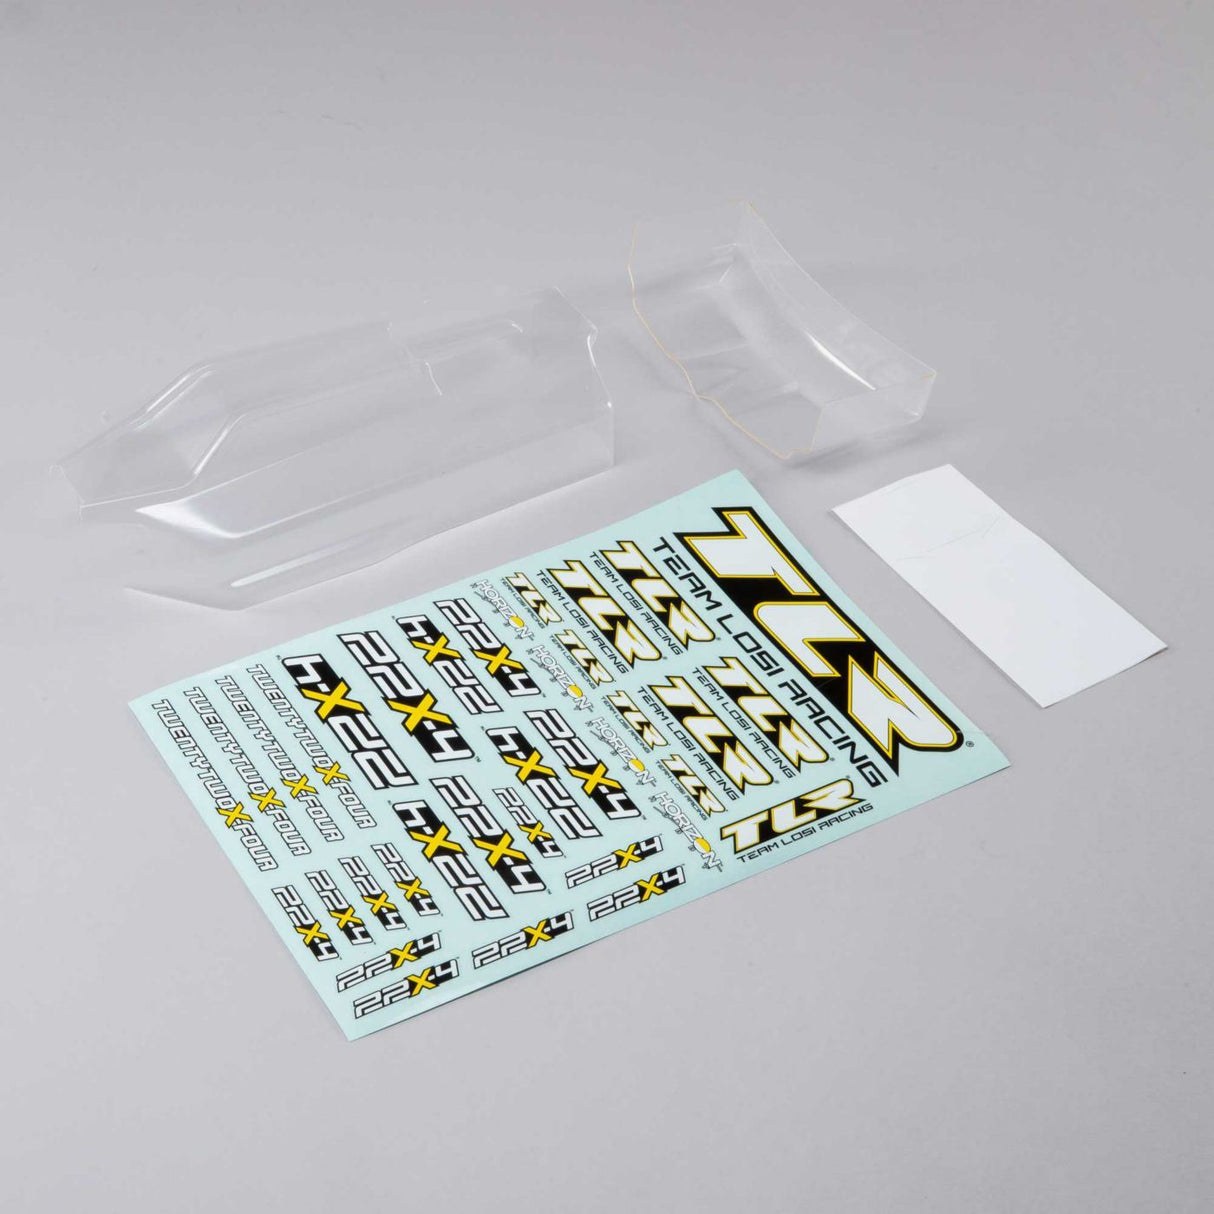 TLR Ultra Lightweight Body & Wing, Clear: 22X-4